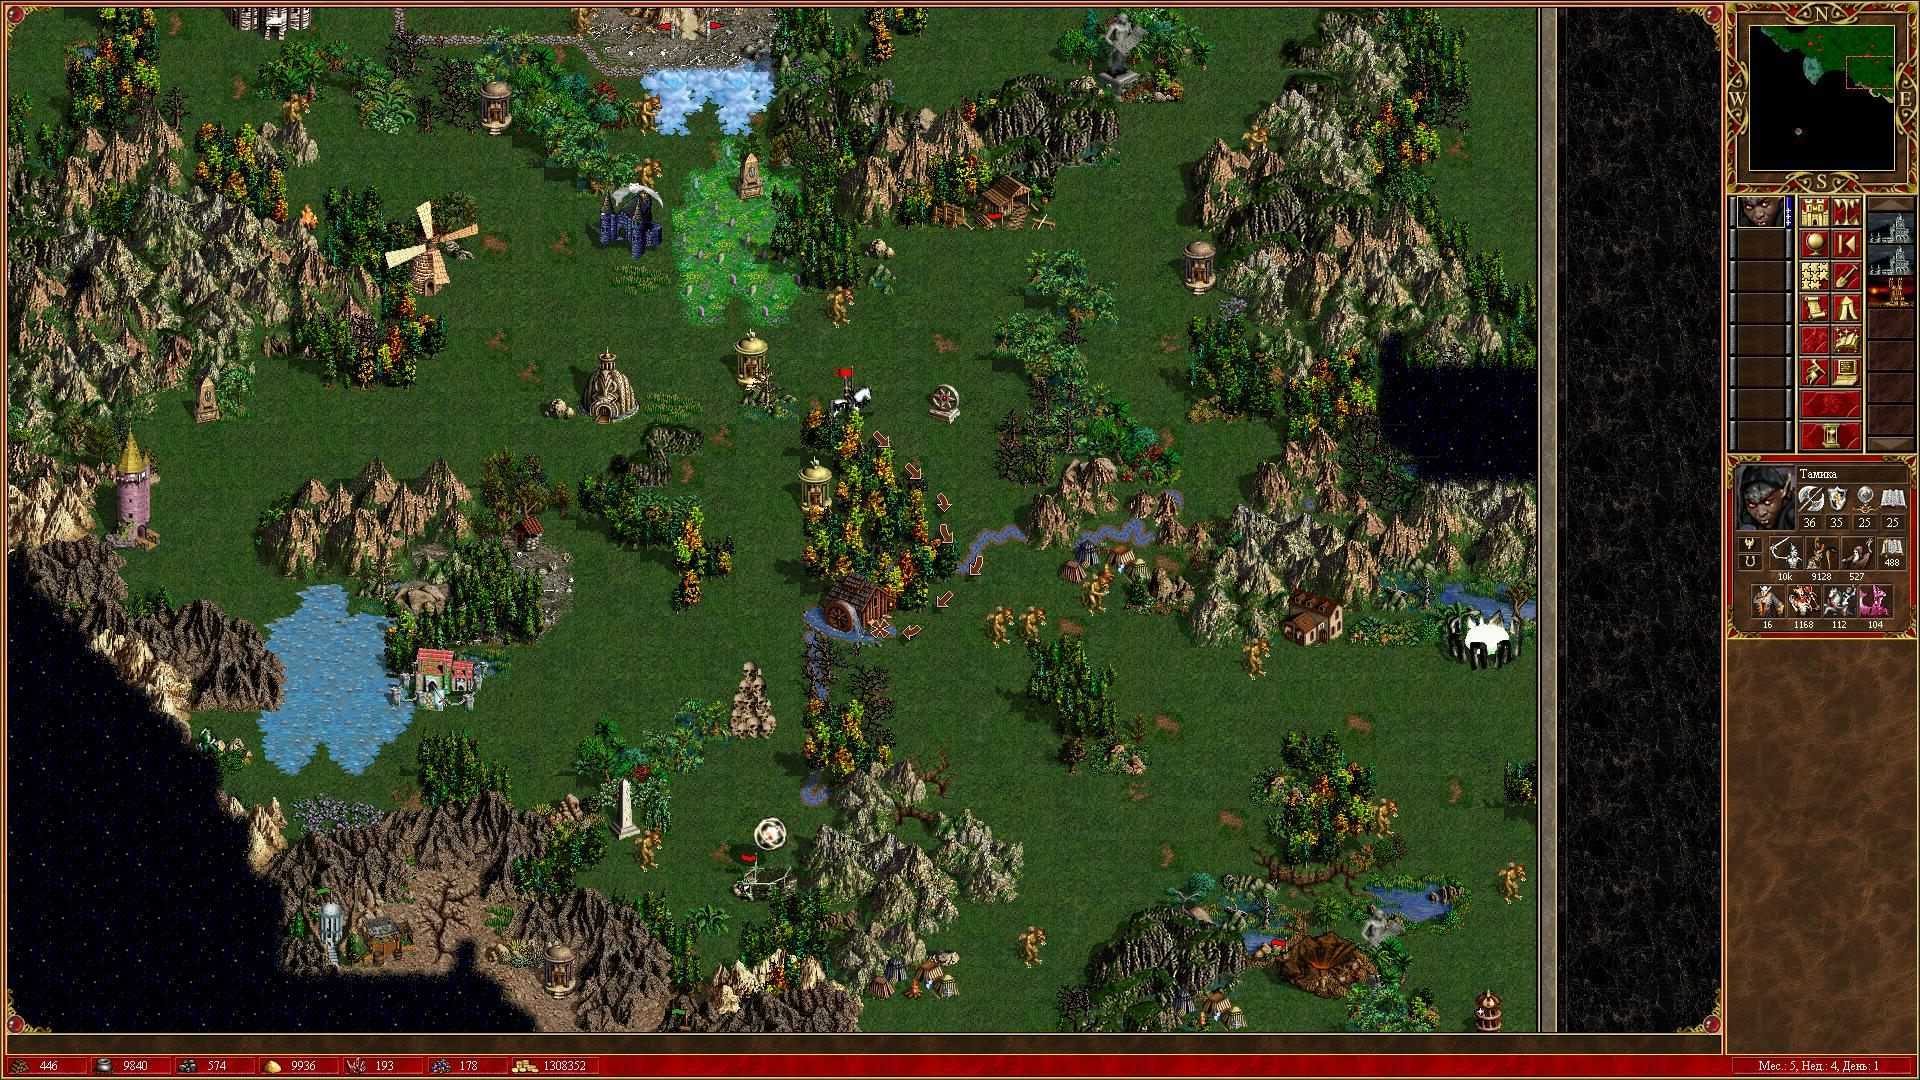 Heroes and magic 3 hota. Heroes of might and Magic 3 in the Wake of Gods. Heroes 3.5: во имя богов. Heroes of might and Magic III WOG 3.58. Heroes of might and Magic 3 WOG 3.61.